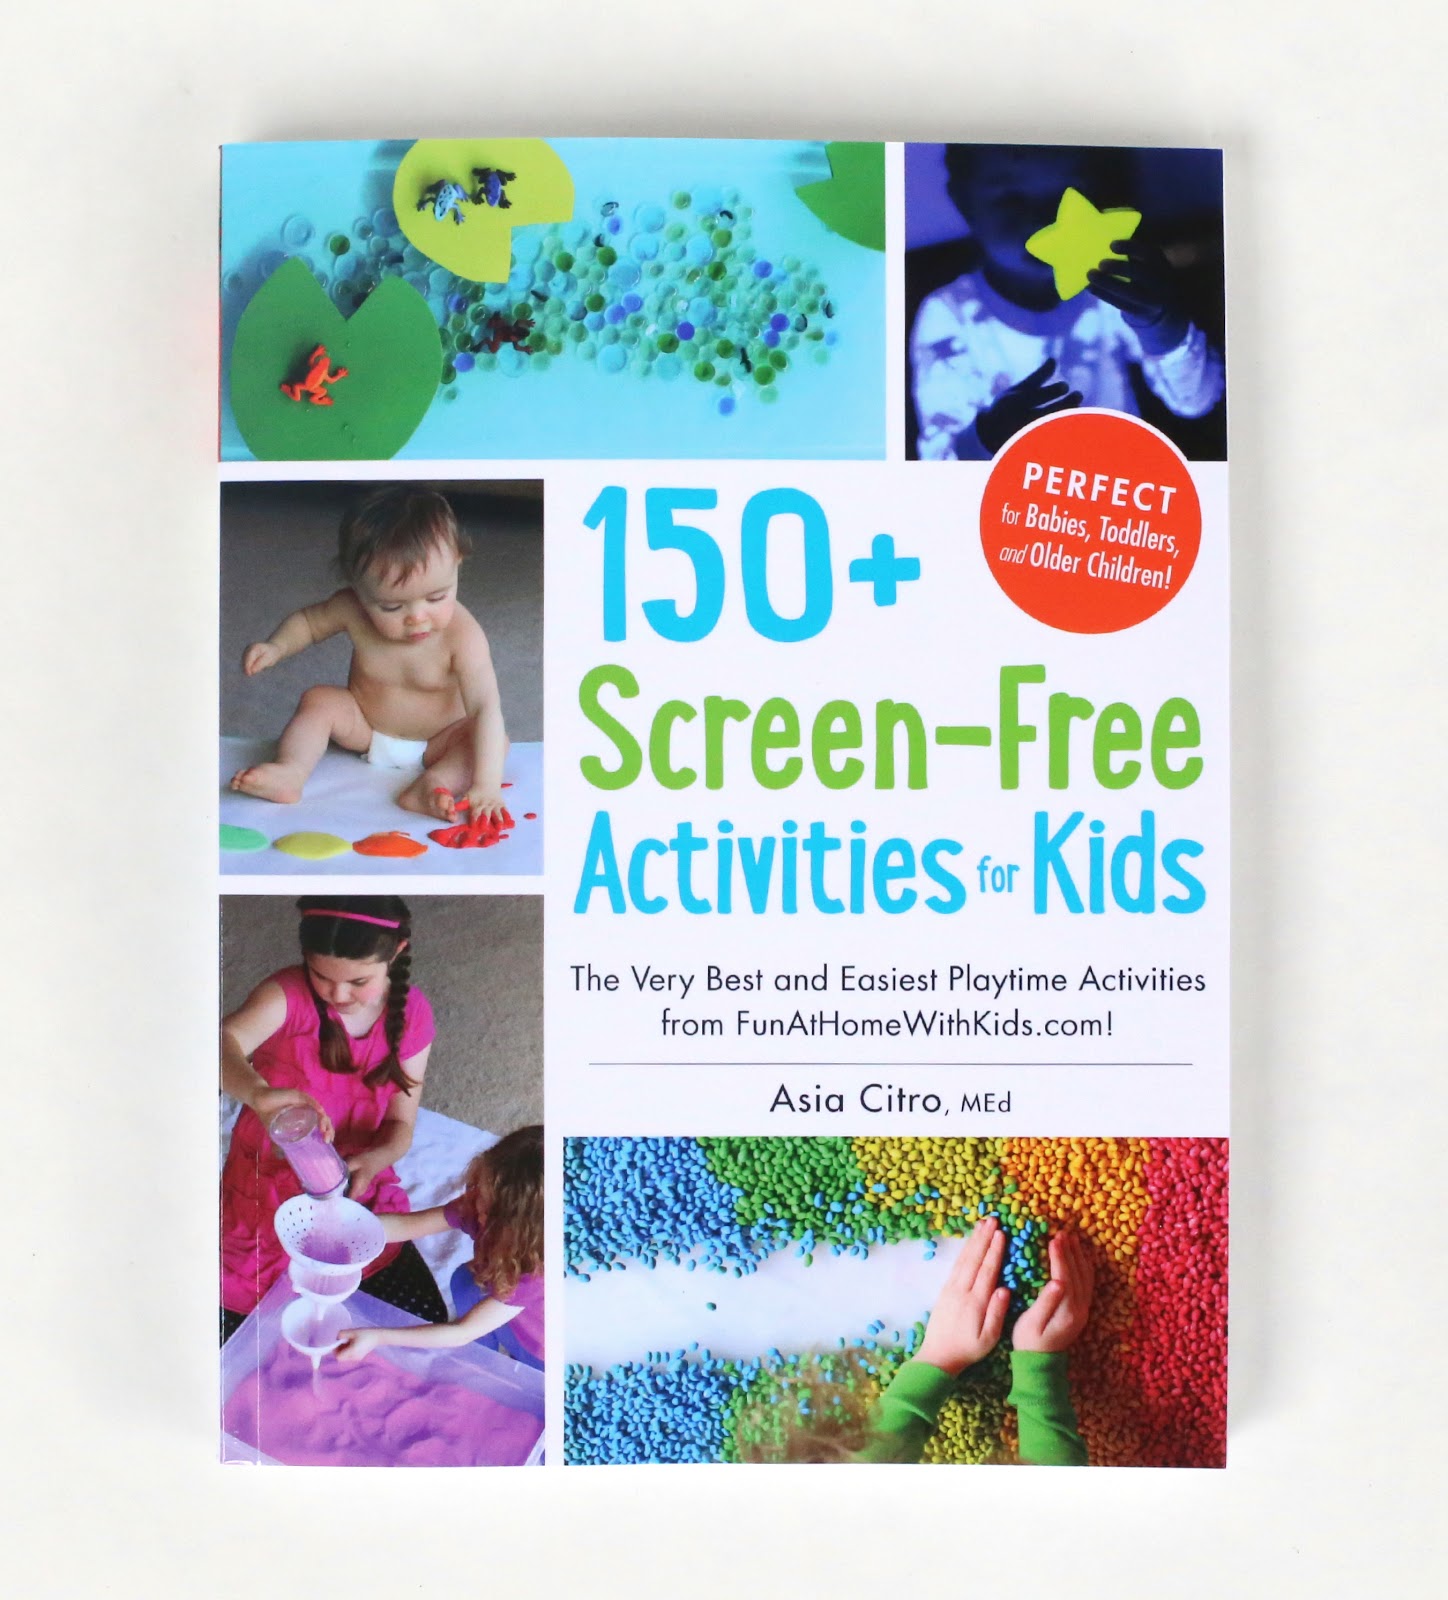 The 150+ Screen-Free Activities for Kids book has 72 activities for babies!  It would make a great creative baby shower gift.